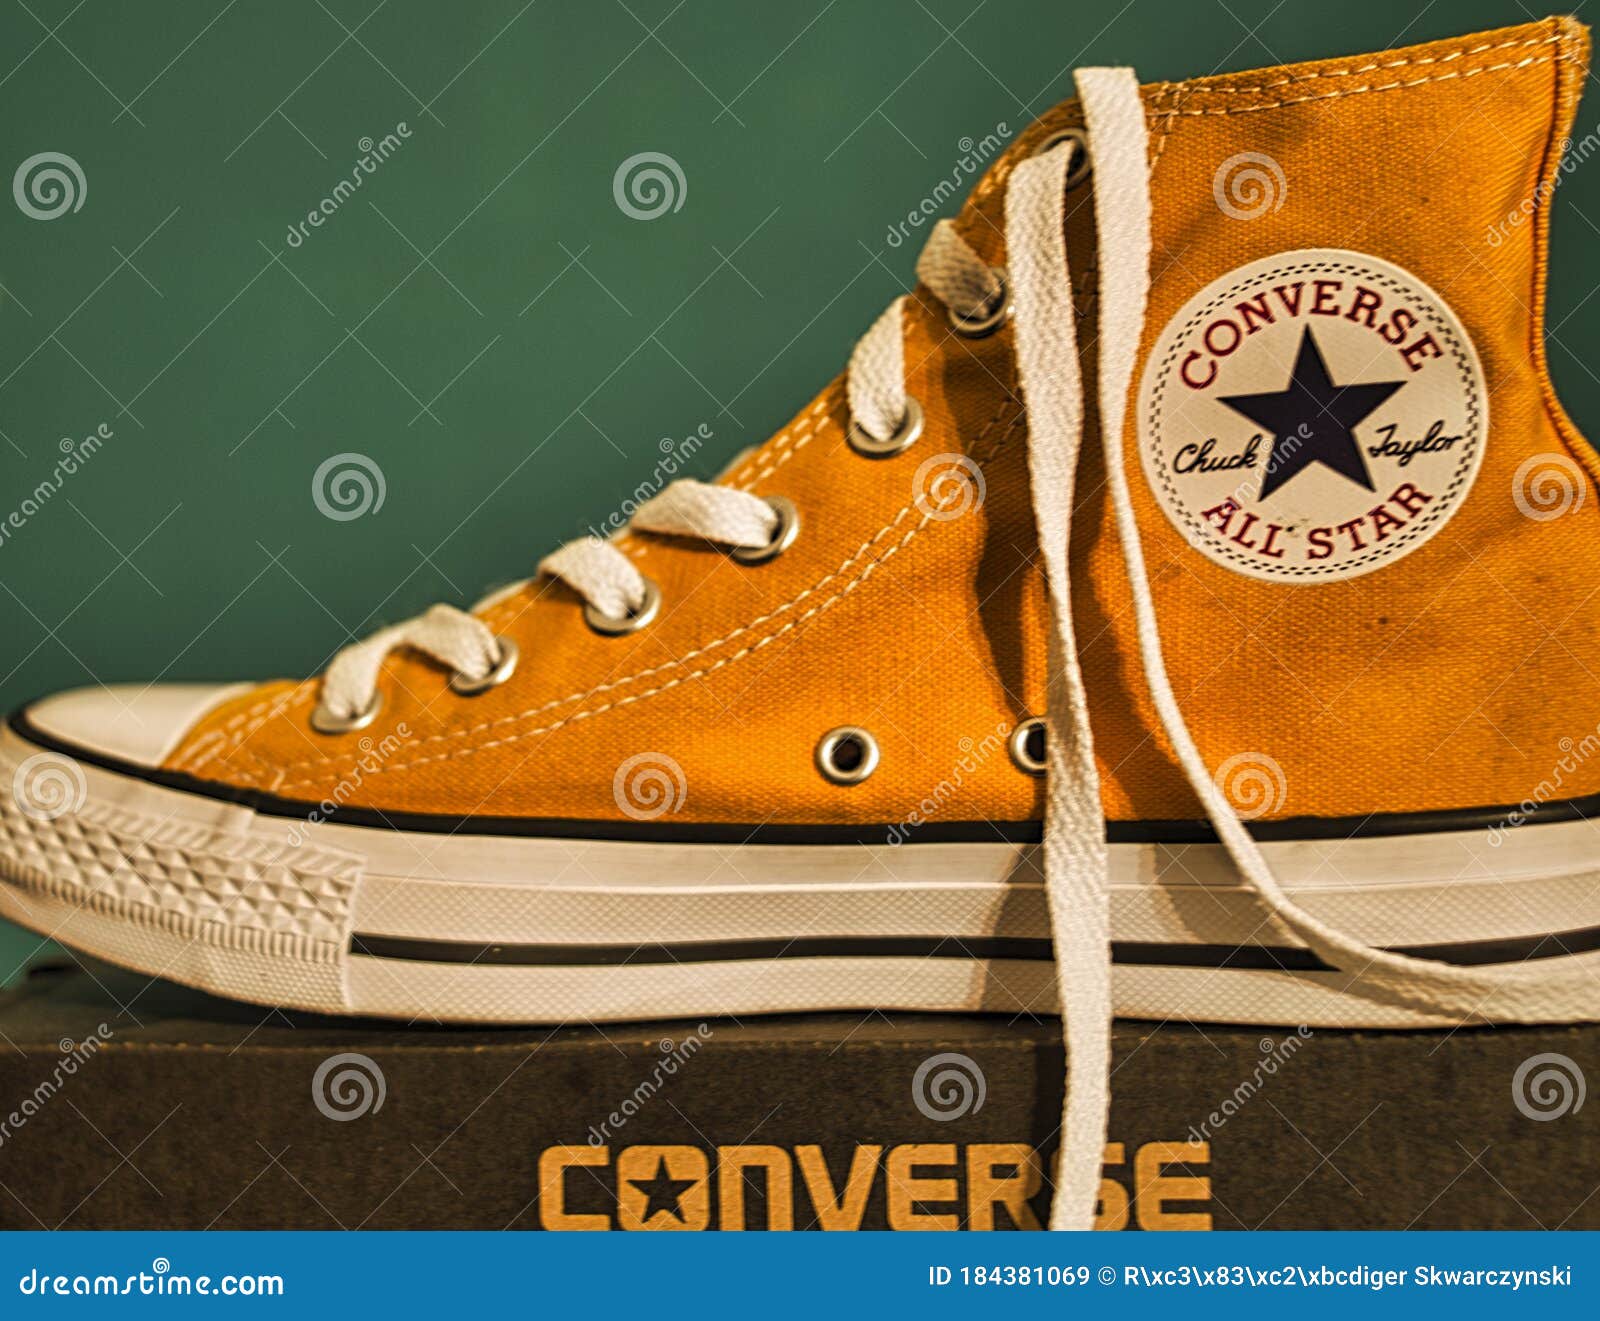 Converse All Star Chuck Taylor Hannover Germany November 18 Sneakers In Orange Ray On The Converse Shoe Box With A Petrol Editorial Stock Image Image Of Taylor Shoe